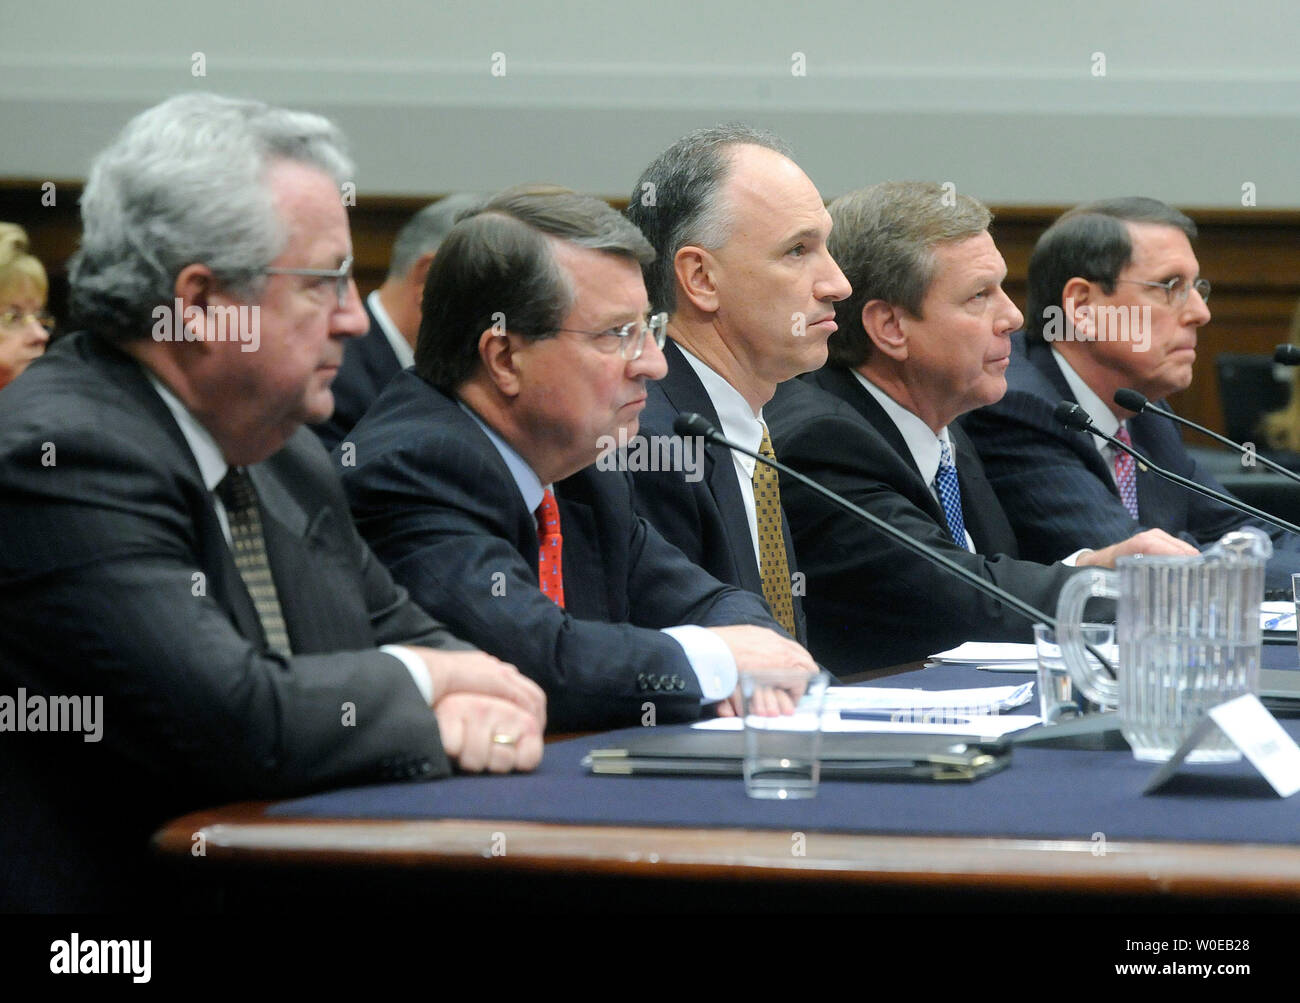 From left to right, John Hofmeister, president of Shell Oil Company, Peter Robertson, vice chairman of the Chevron Corporation, John Lowe, executive vice president of ConocoPhillips, Robert Malone, chairman and president of BP America Inc. and Stephen Simon, senior vice president of the Exxon Mobil Corporation, testify before a House Judiciary Committee hearing on the rising price of oil in Washington on May 22, 2008. (UPI Photo/Kevin Dietsch) Stock Photo